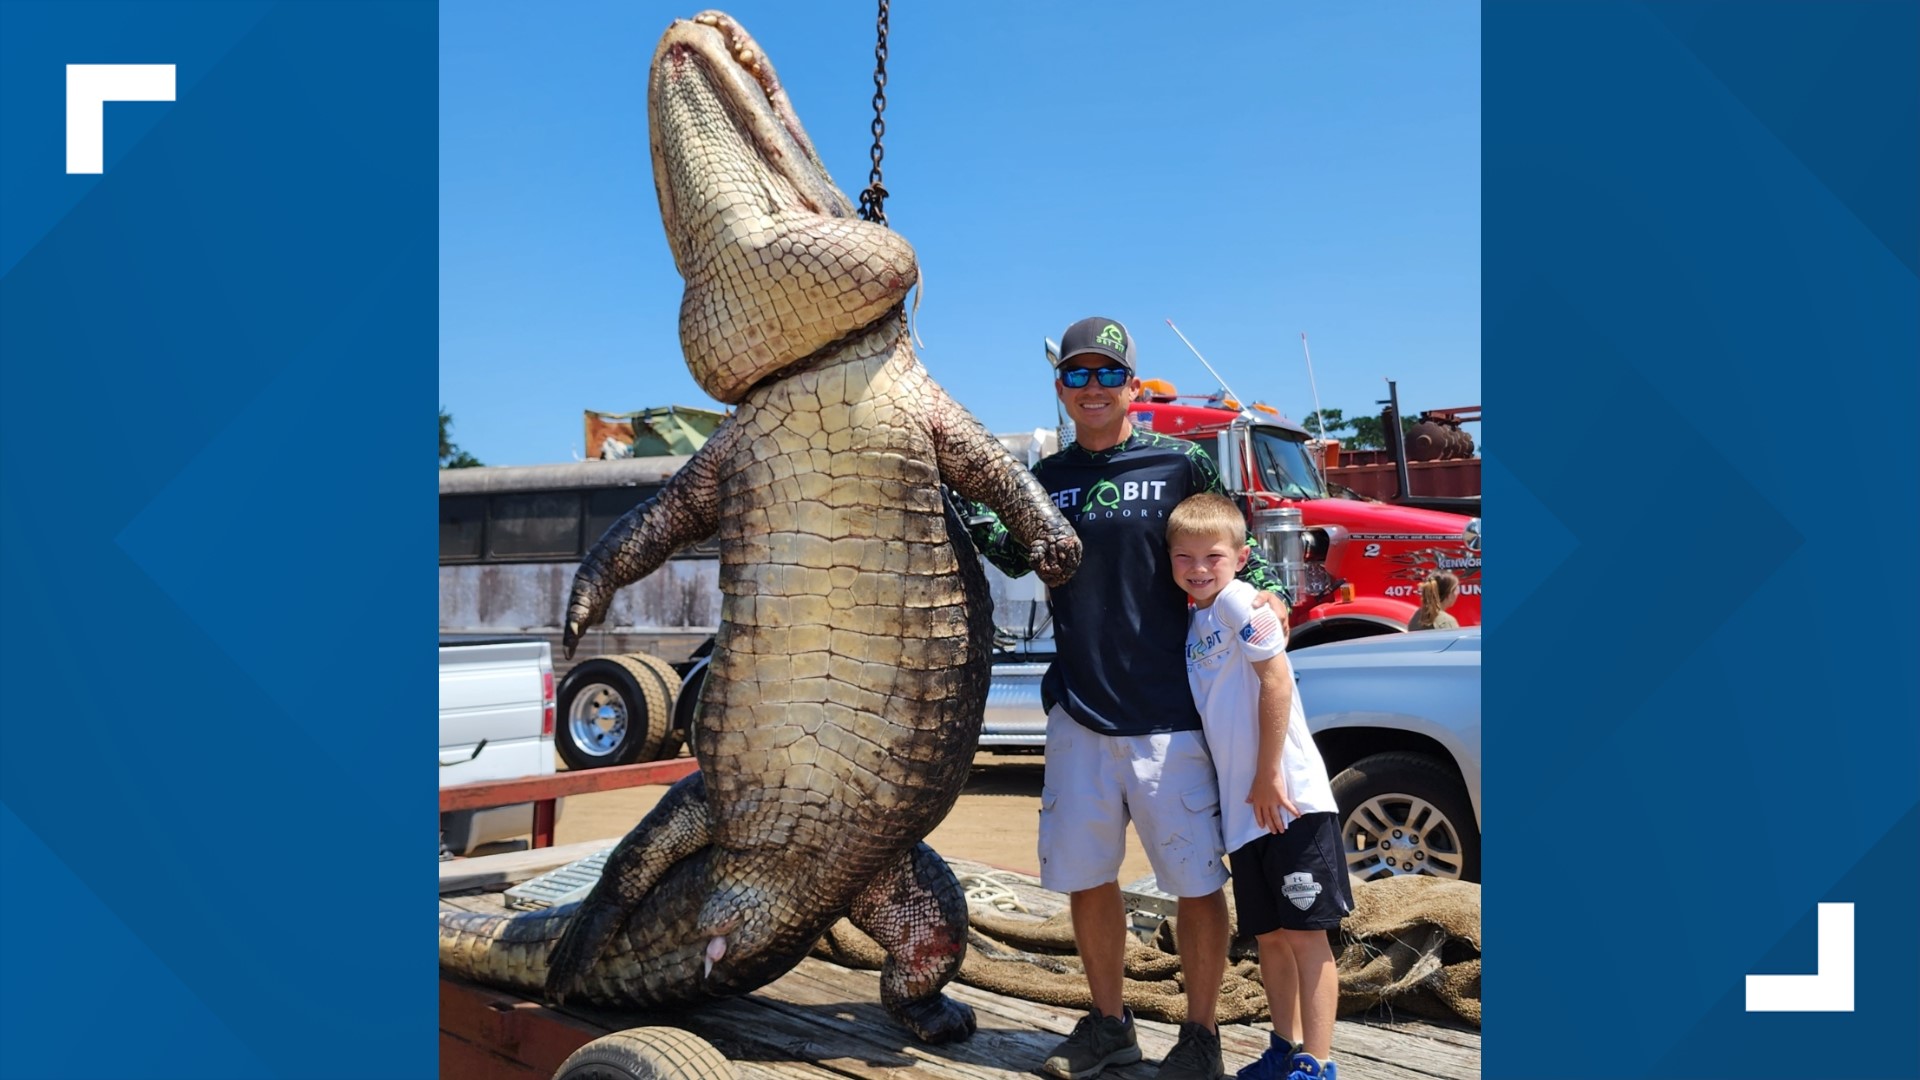 According to Capt. Kevin Brotz, it’s rare to come across a gator this big, with his second biggest coming out just a couple of inches smaller.